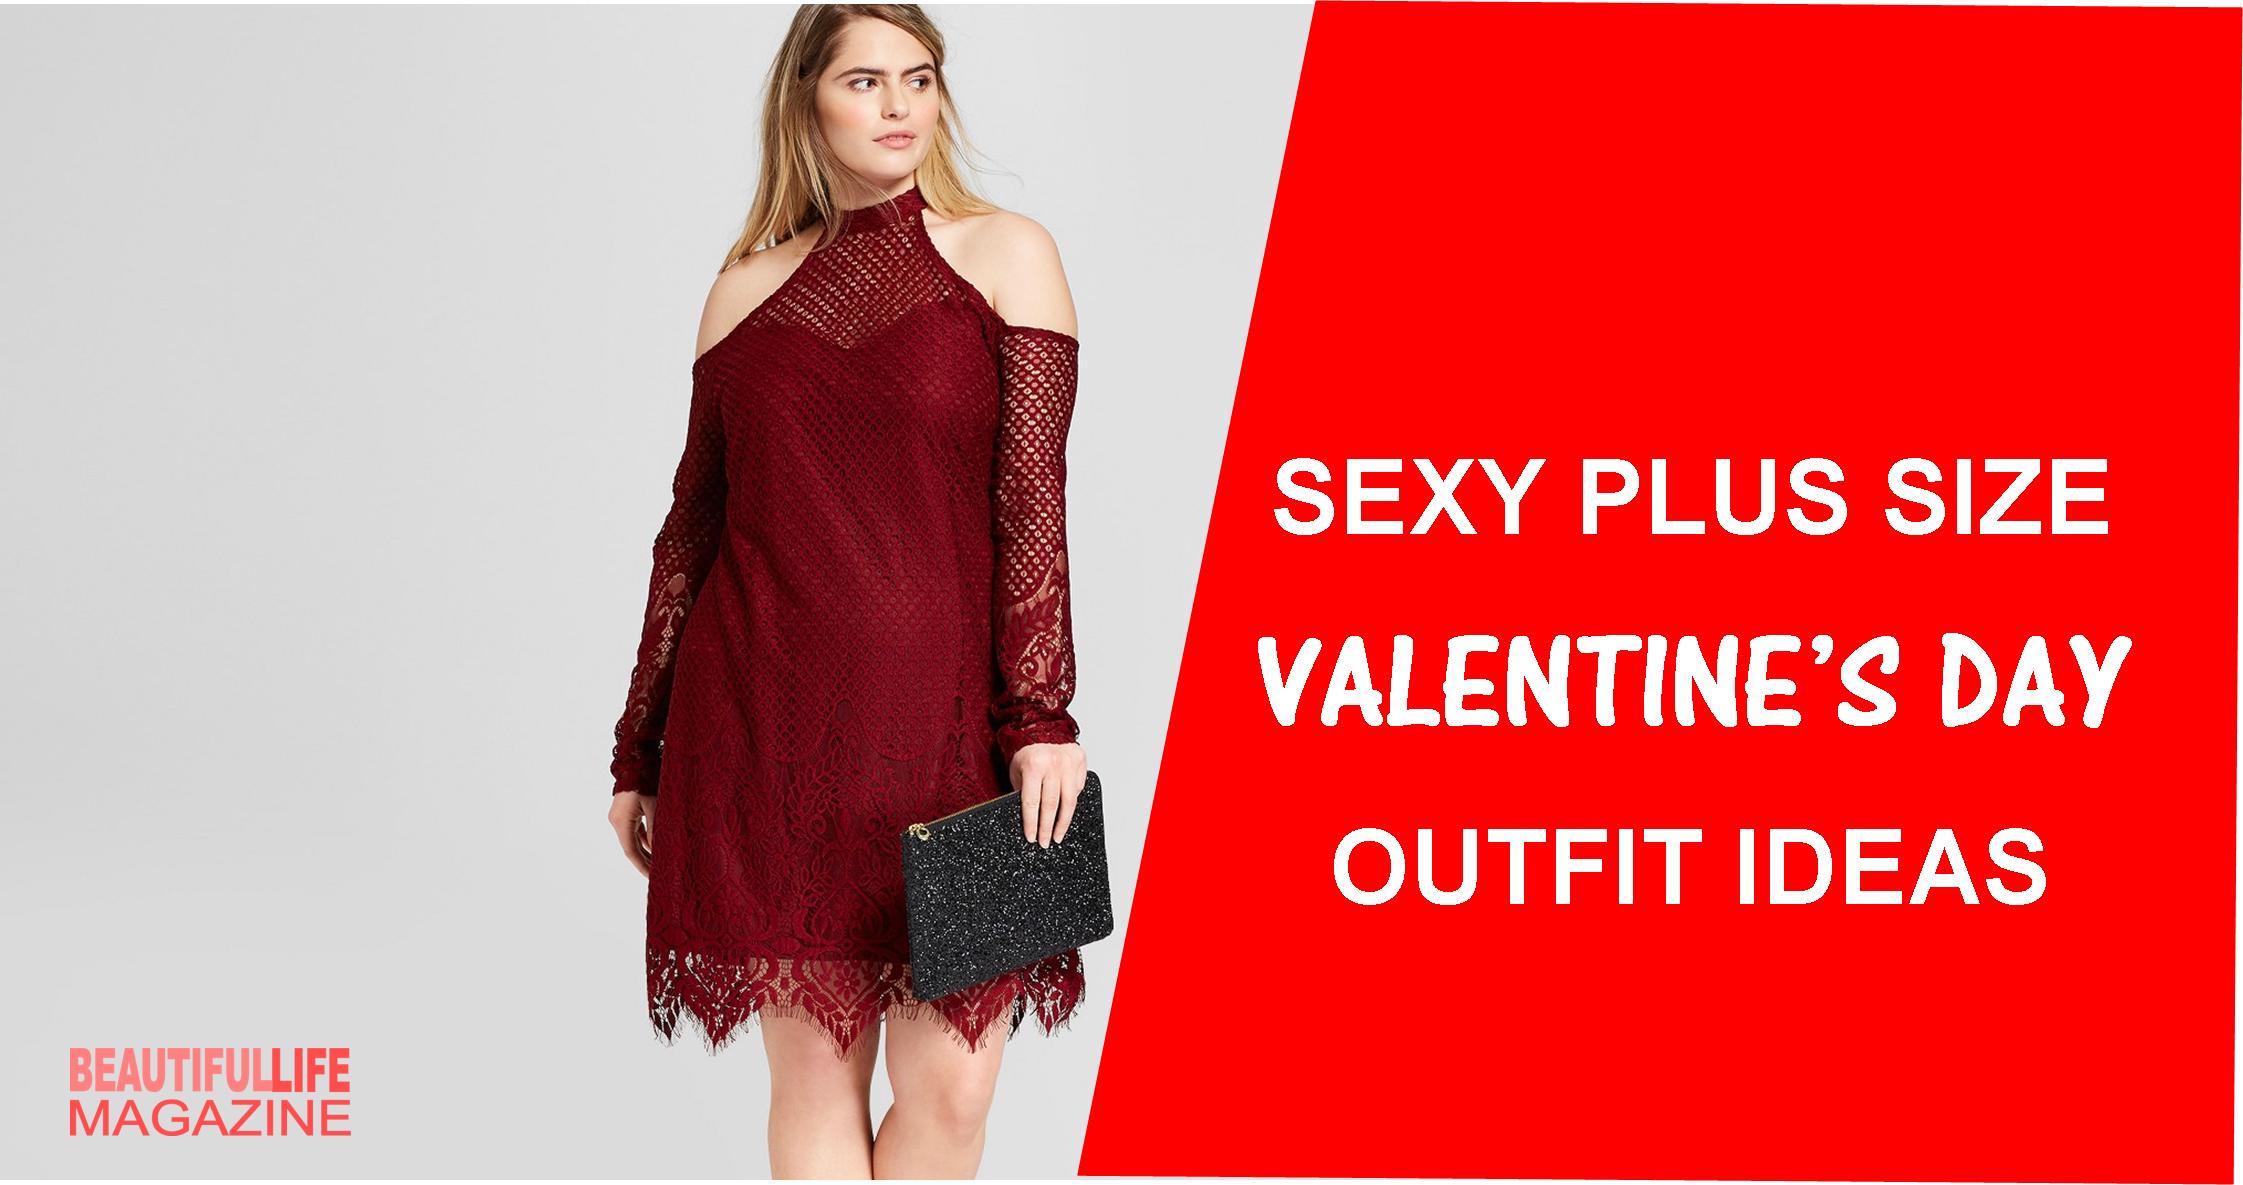 10 Sexy Plus Size Valentine's Day Outfit Ideas. Valentine's Day is right around the corner, what are you wearing? Whether you subscribe to Hallmark holiday's or not, it's fun to dress up for date night. Date with your mate or girls night out - either way, it's a good time.